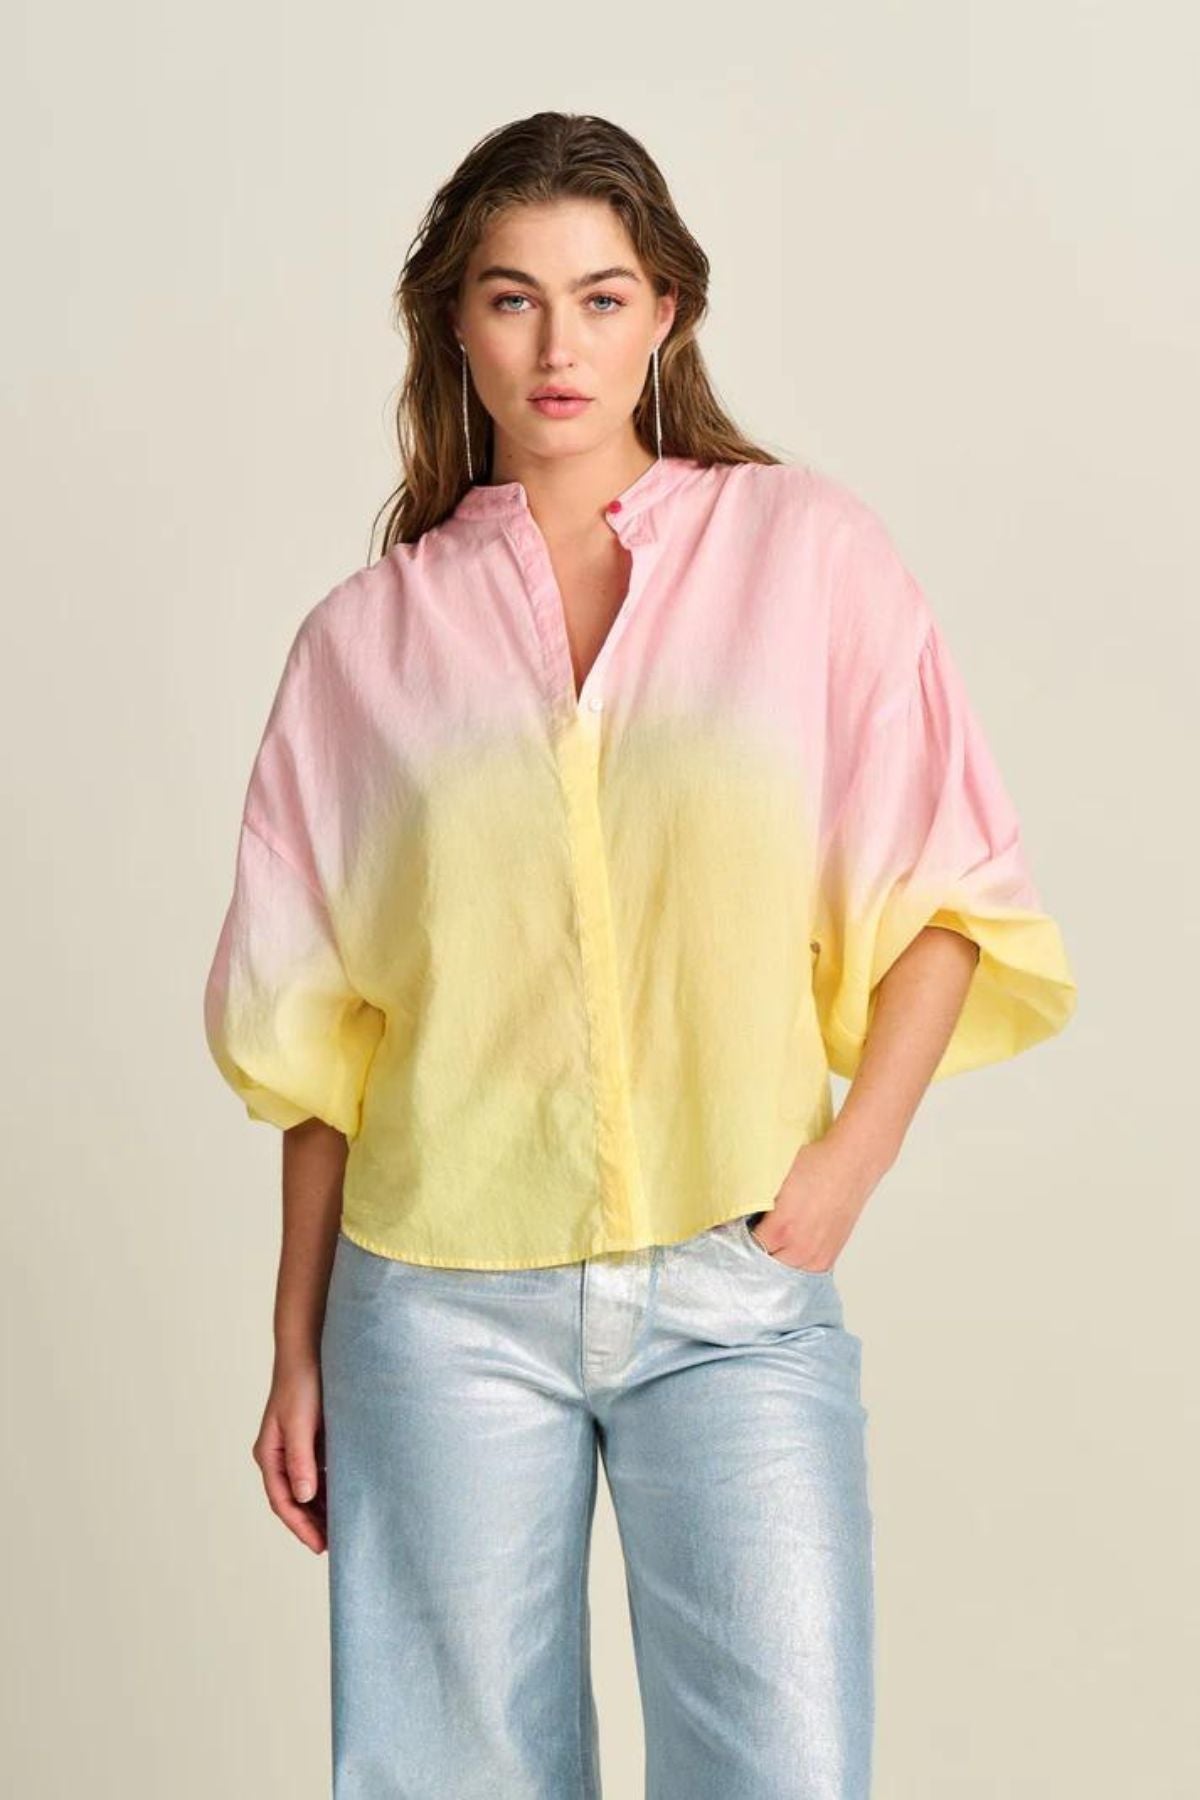 POM AMSTERDAM - blouse faded - BLOOMING PINK